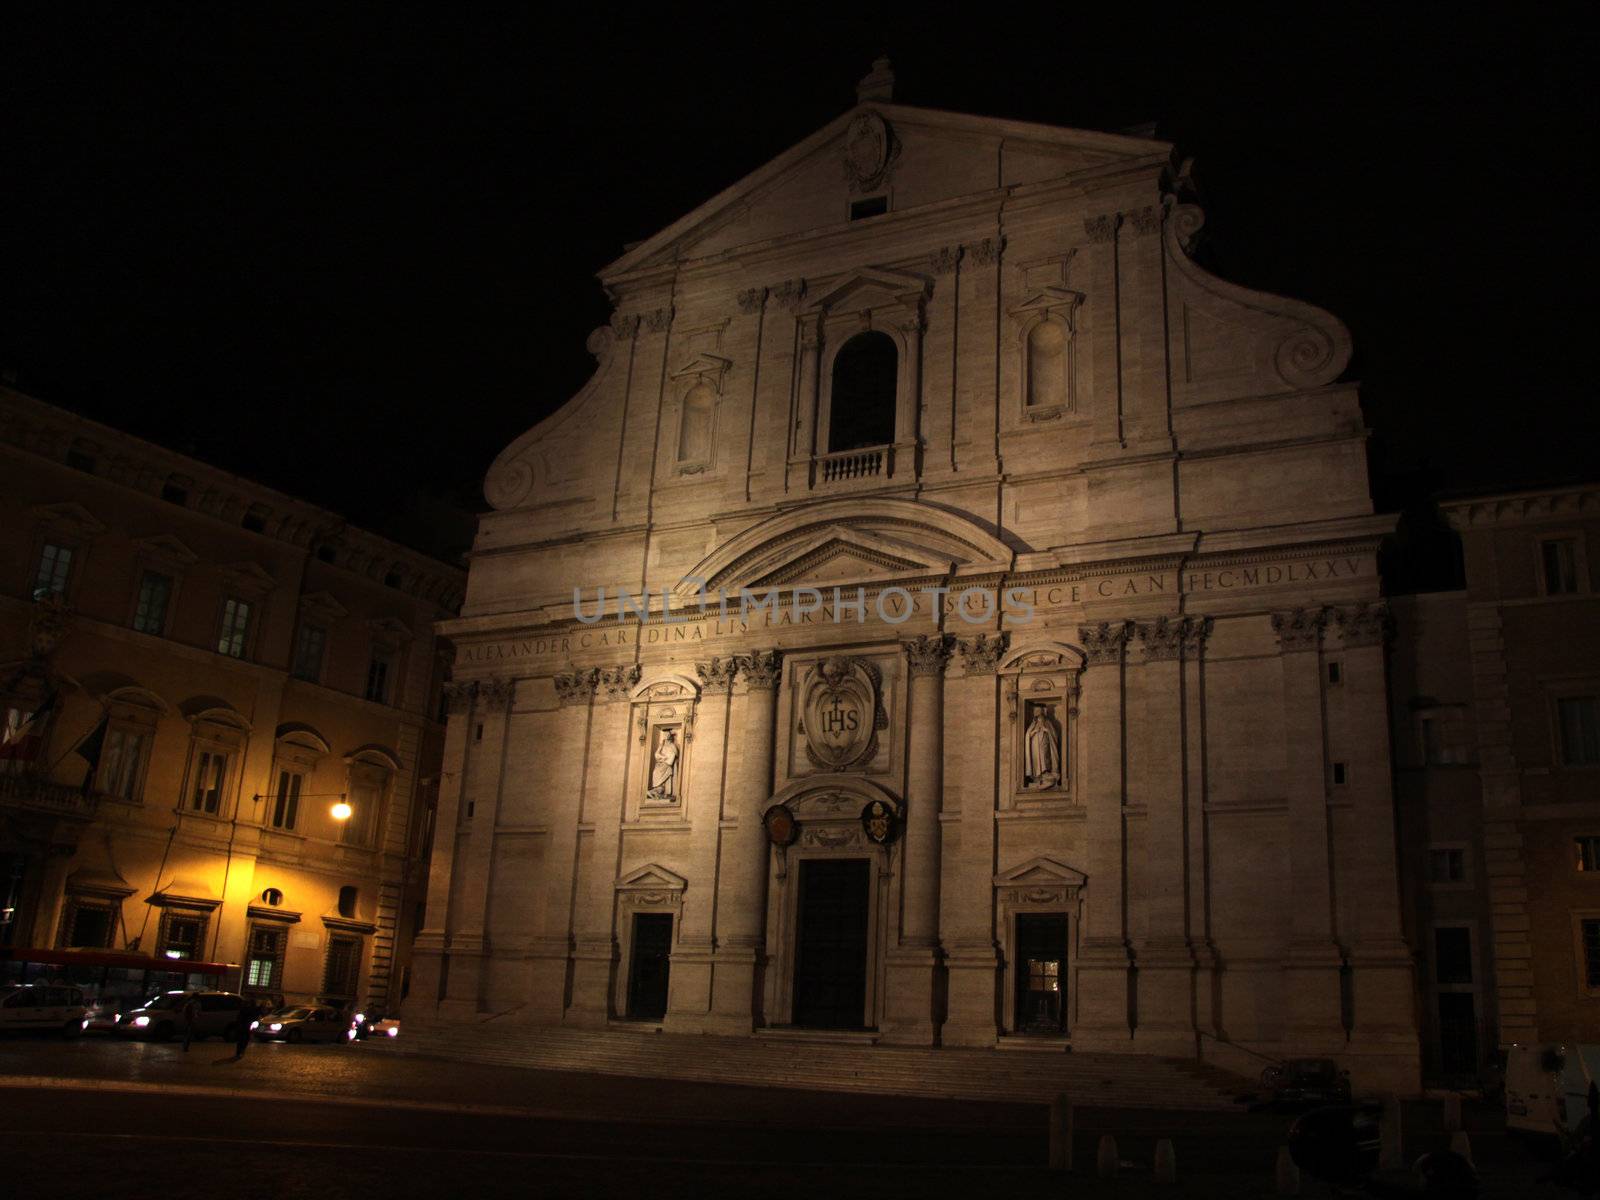 The facade of the church of San Ignazio at night, in Rome, Italy.
